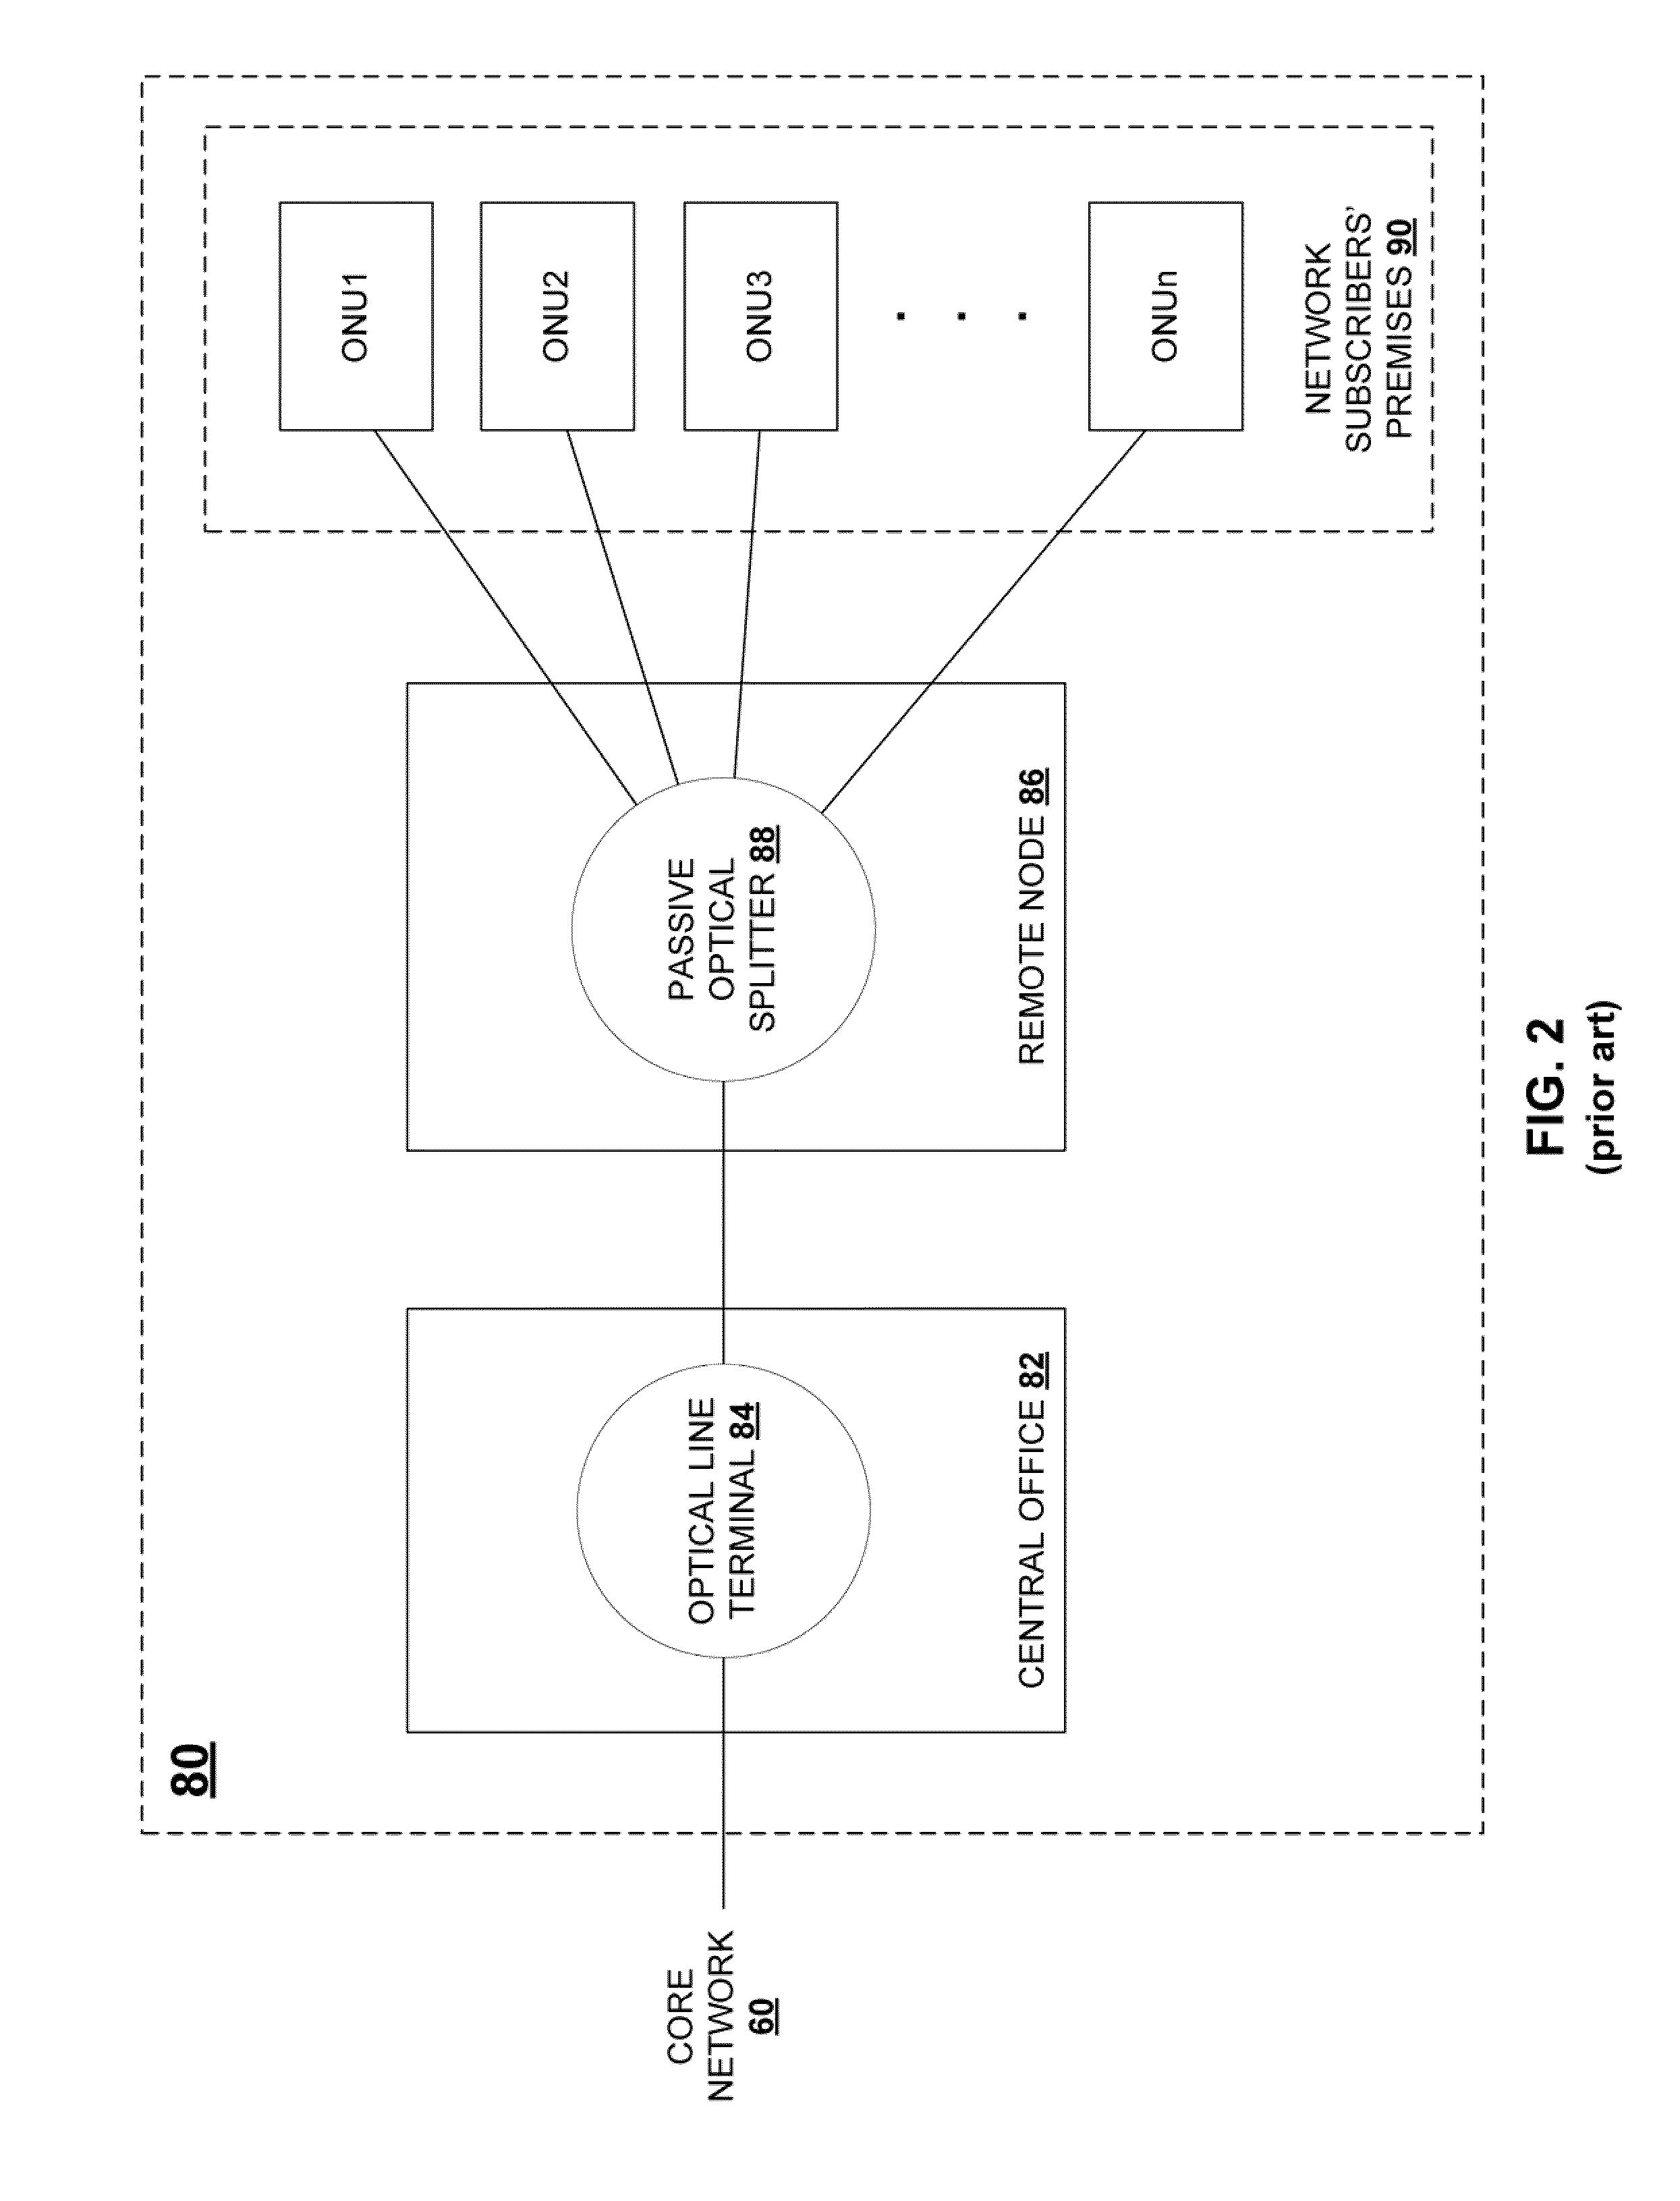 Multicore fiber transmission systems and methods